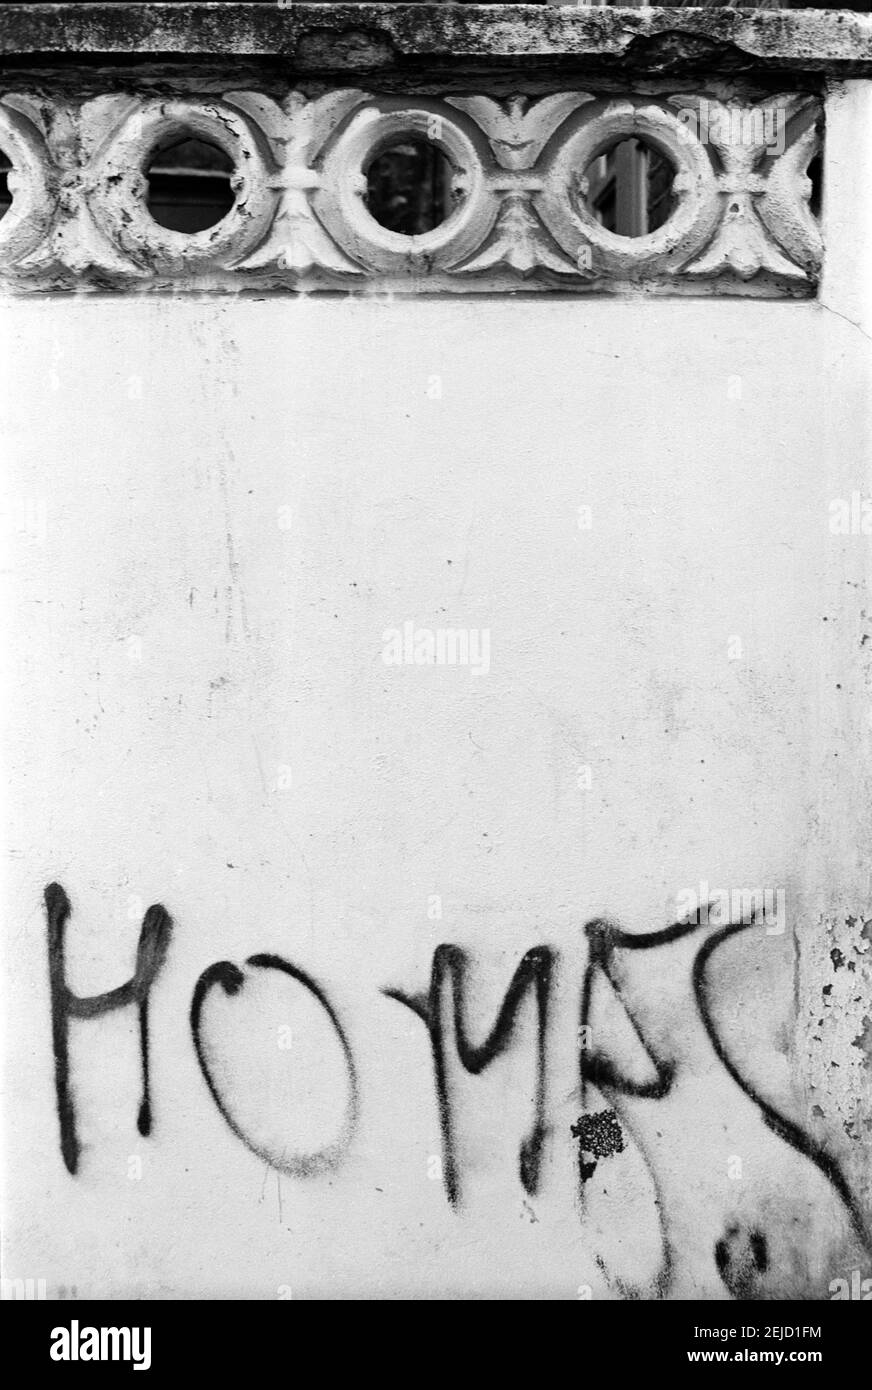 Royaume-Uni, West London, Notting Hill, 1973. Graffiti 'Homess'. Banque D'Images